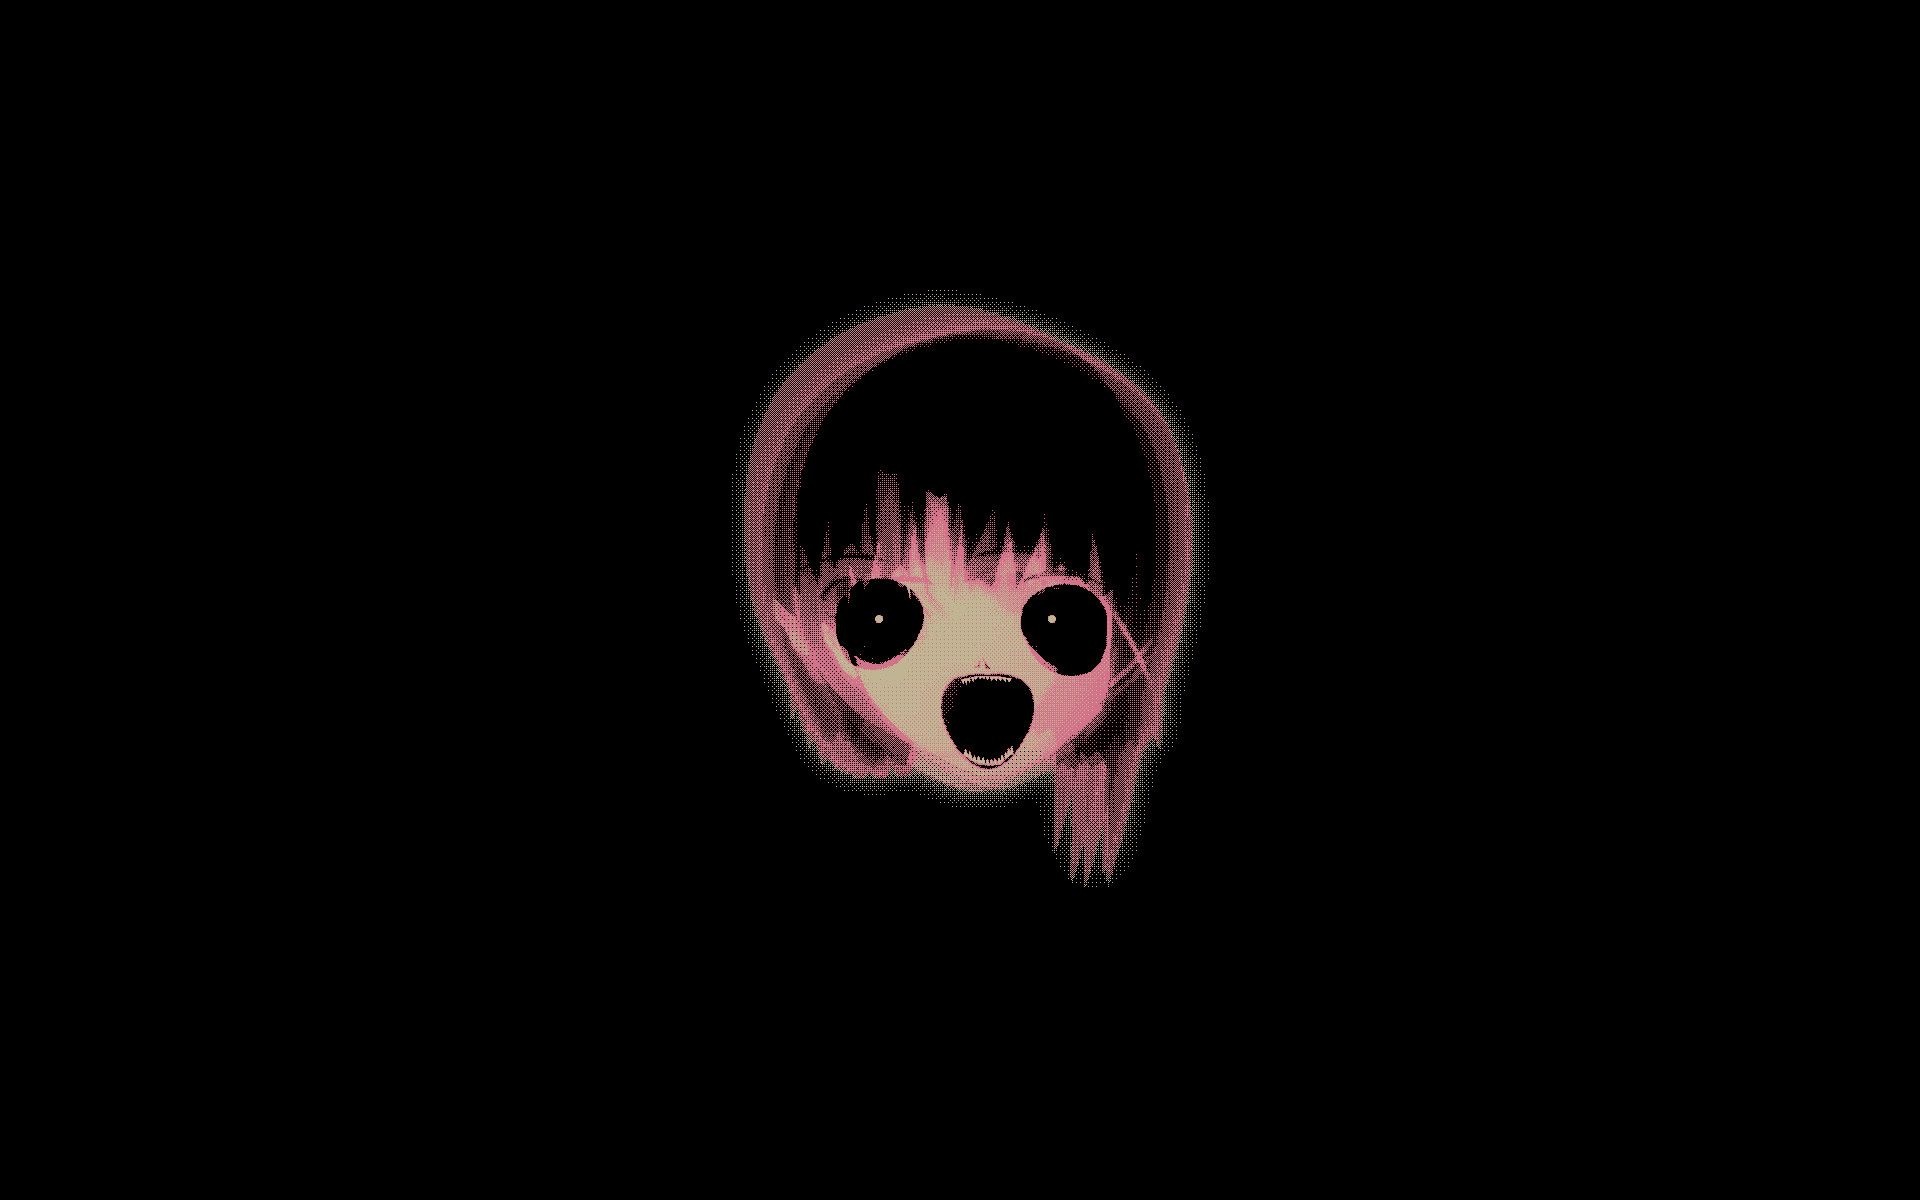 Serial Experiments Lain Wallpaper [1920x1200] uncompressed